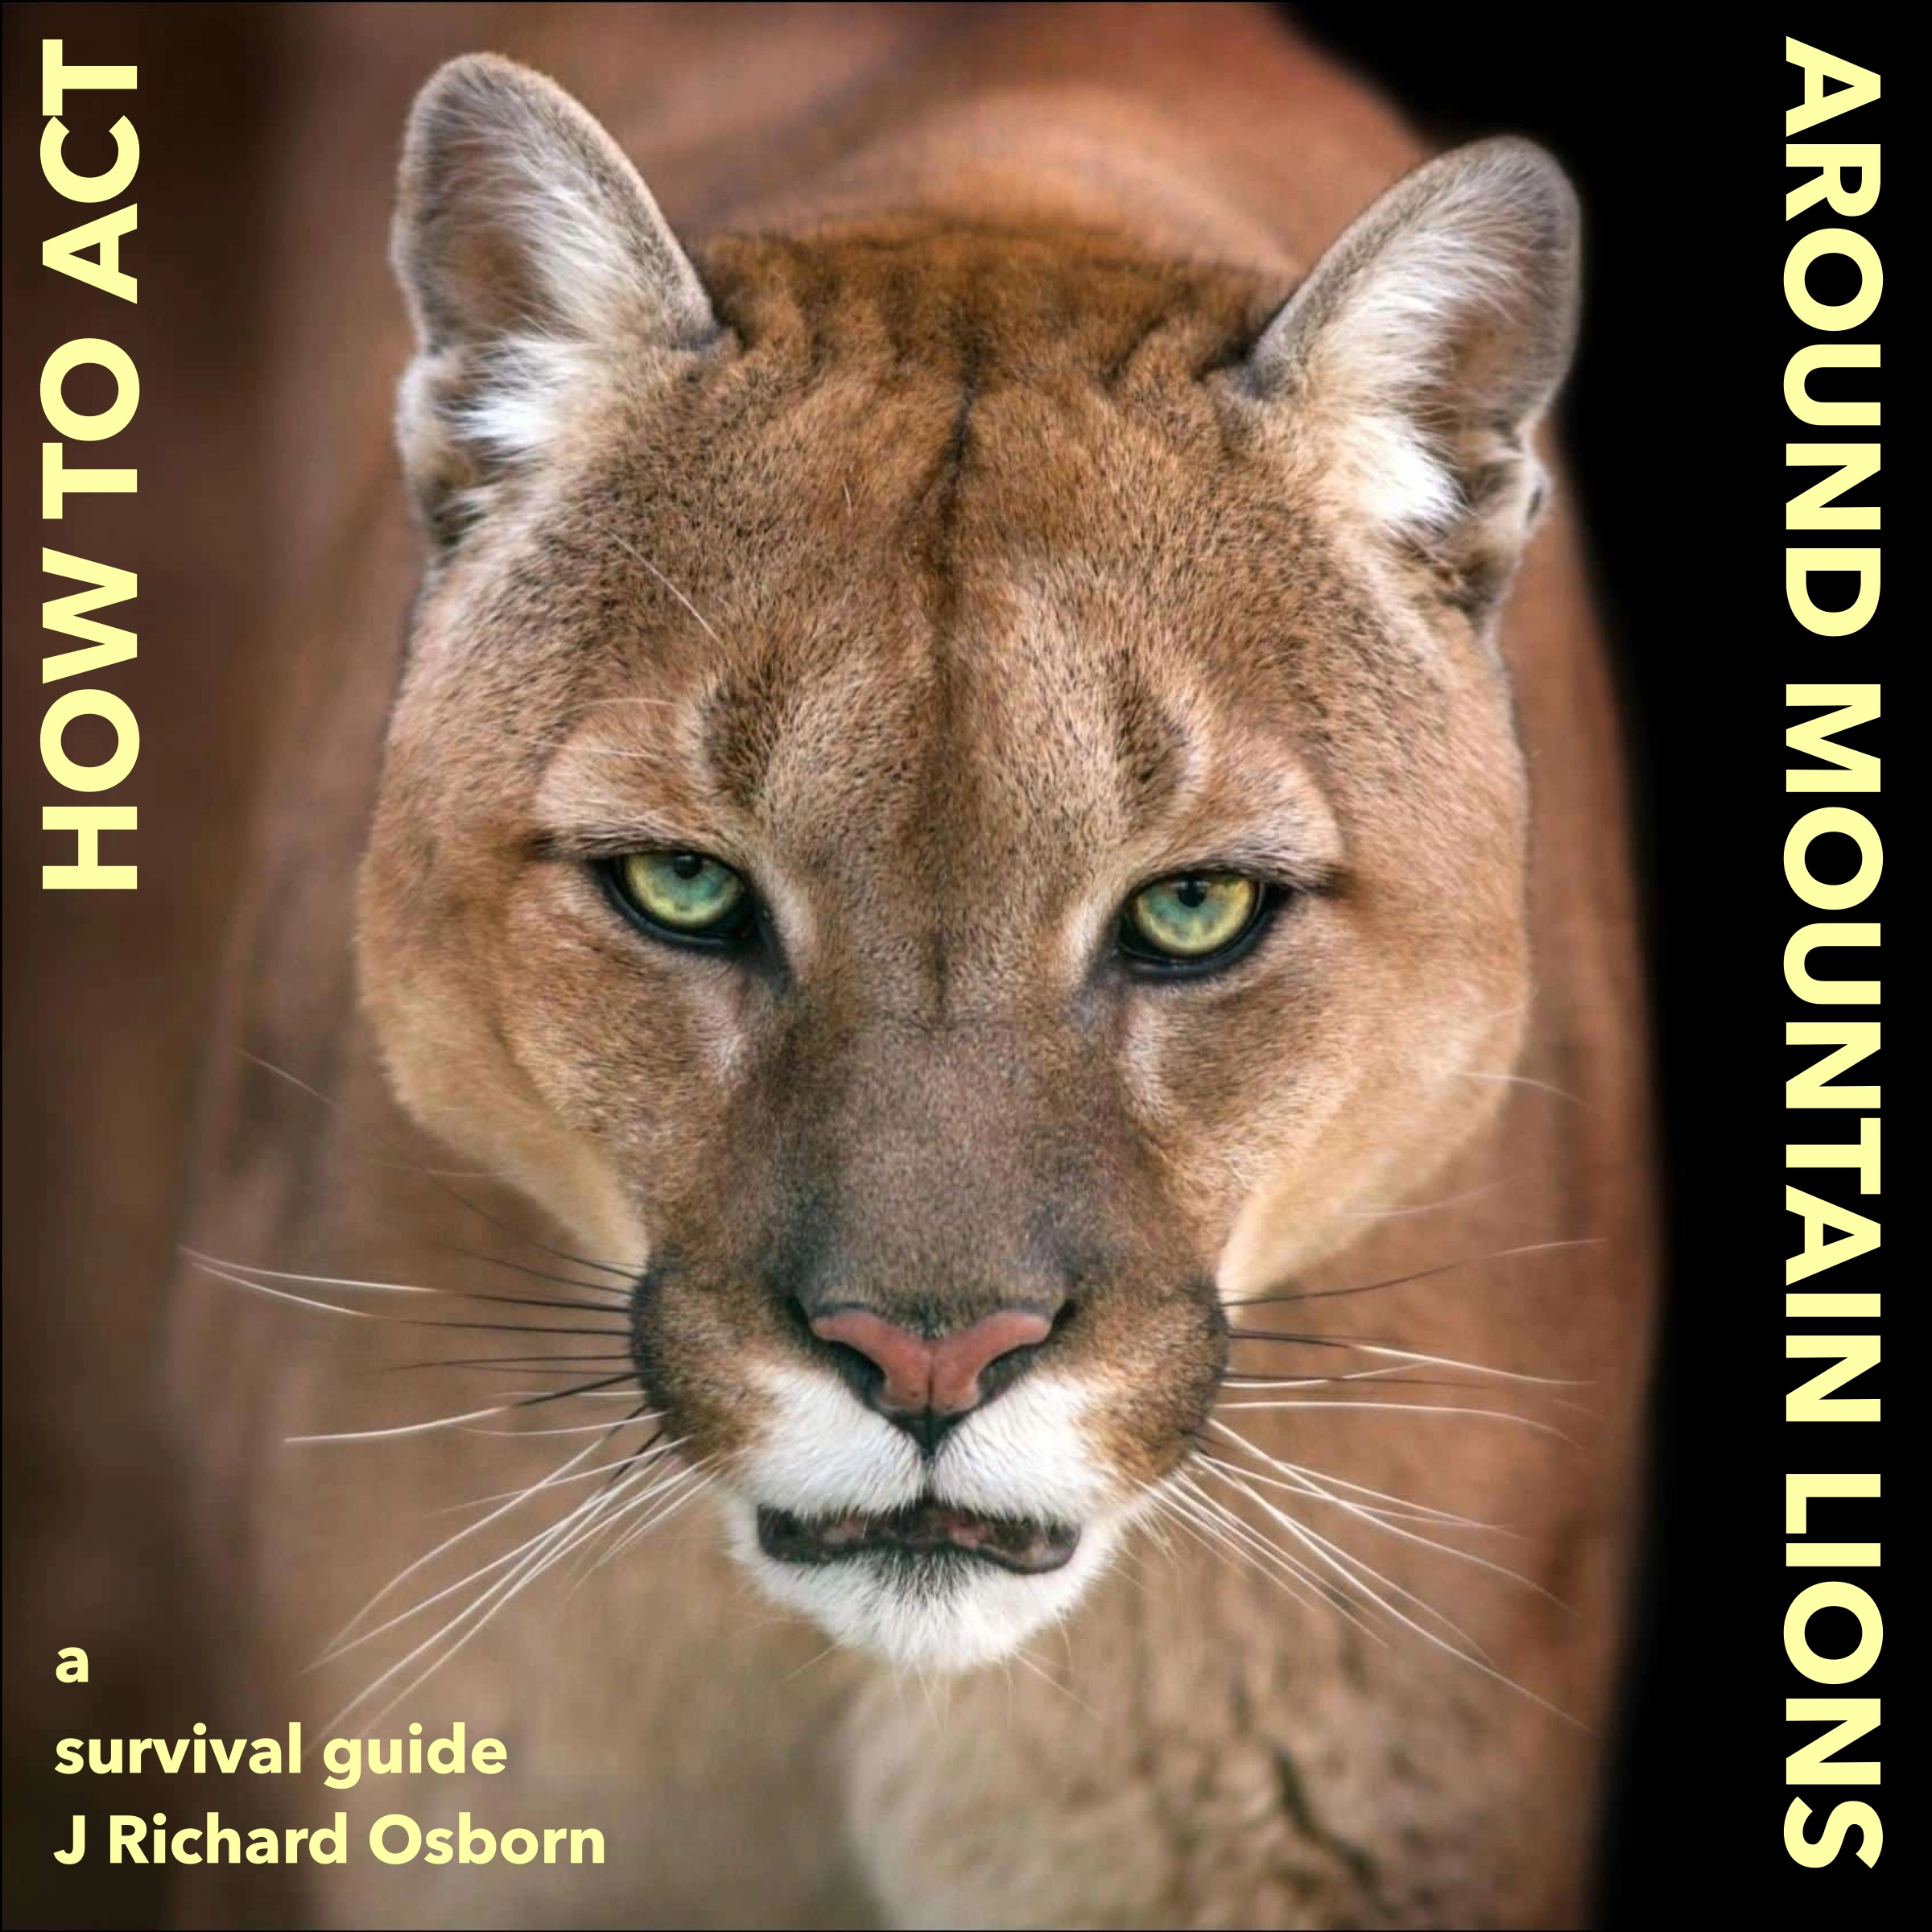 How to Act around Mountain Lions by J Richard Osborn Audiobook